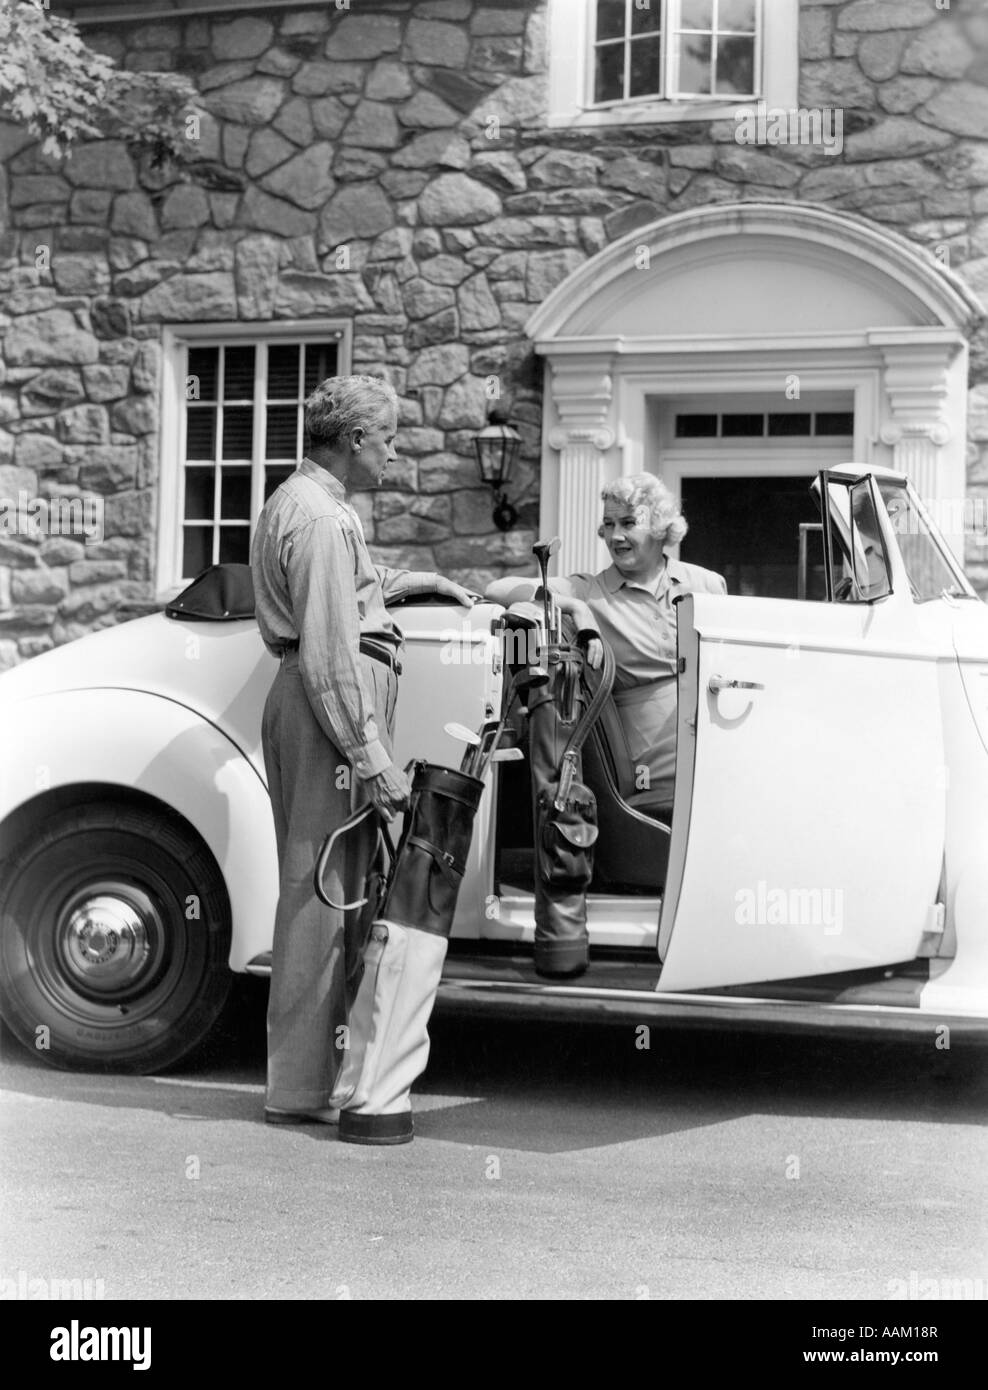 1940s SENIOR RETIRED COUPLE LOADING GOLF CLUBS INTO WHITE CONVERTIBLE CAR IN FRONT STONE HOUSE Stock Photo